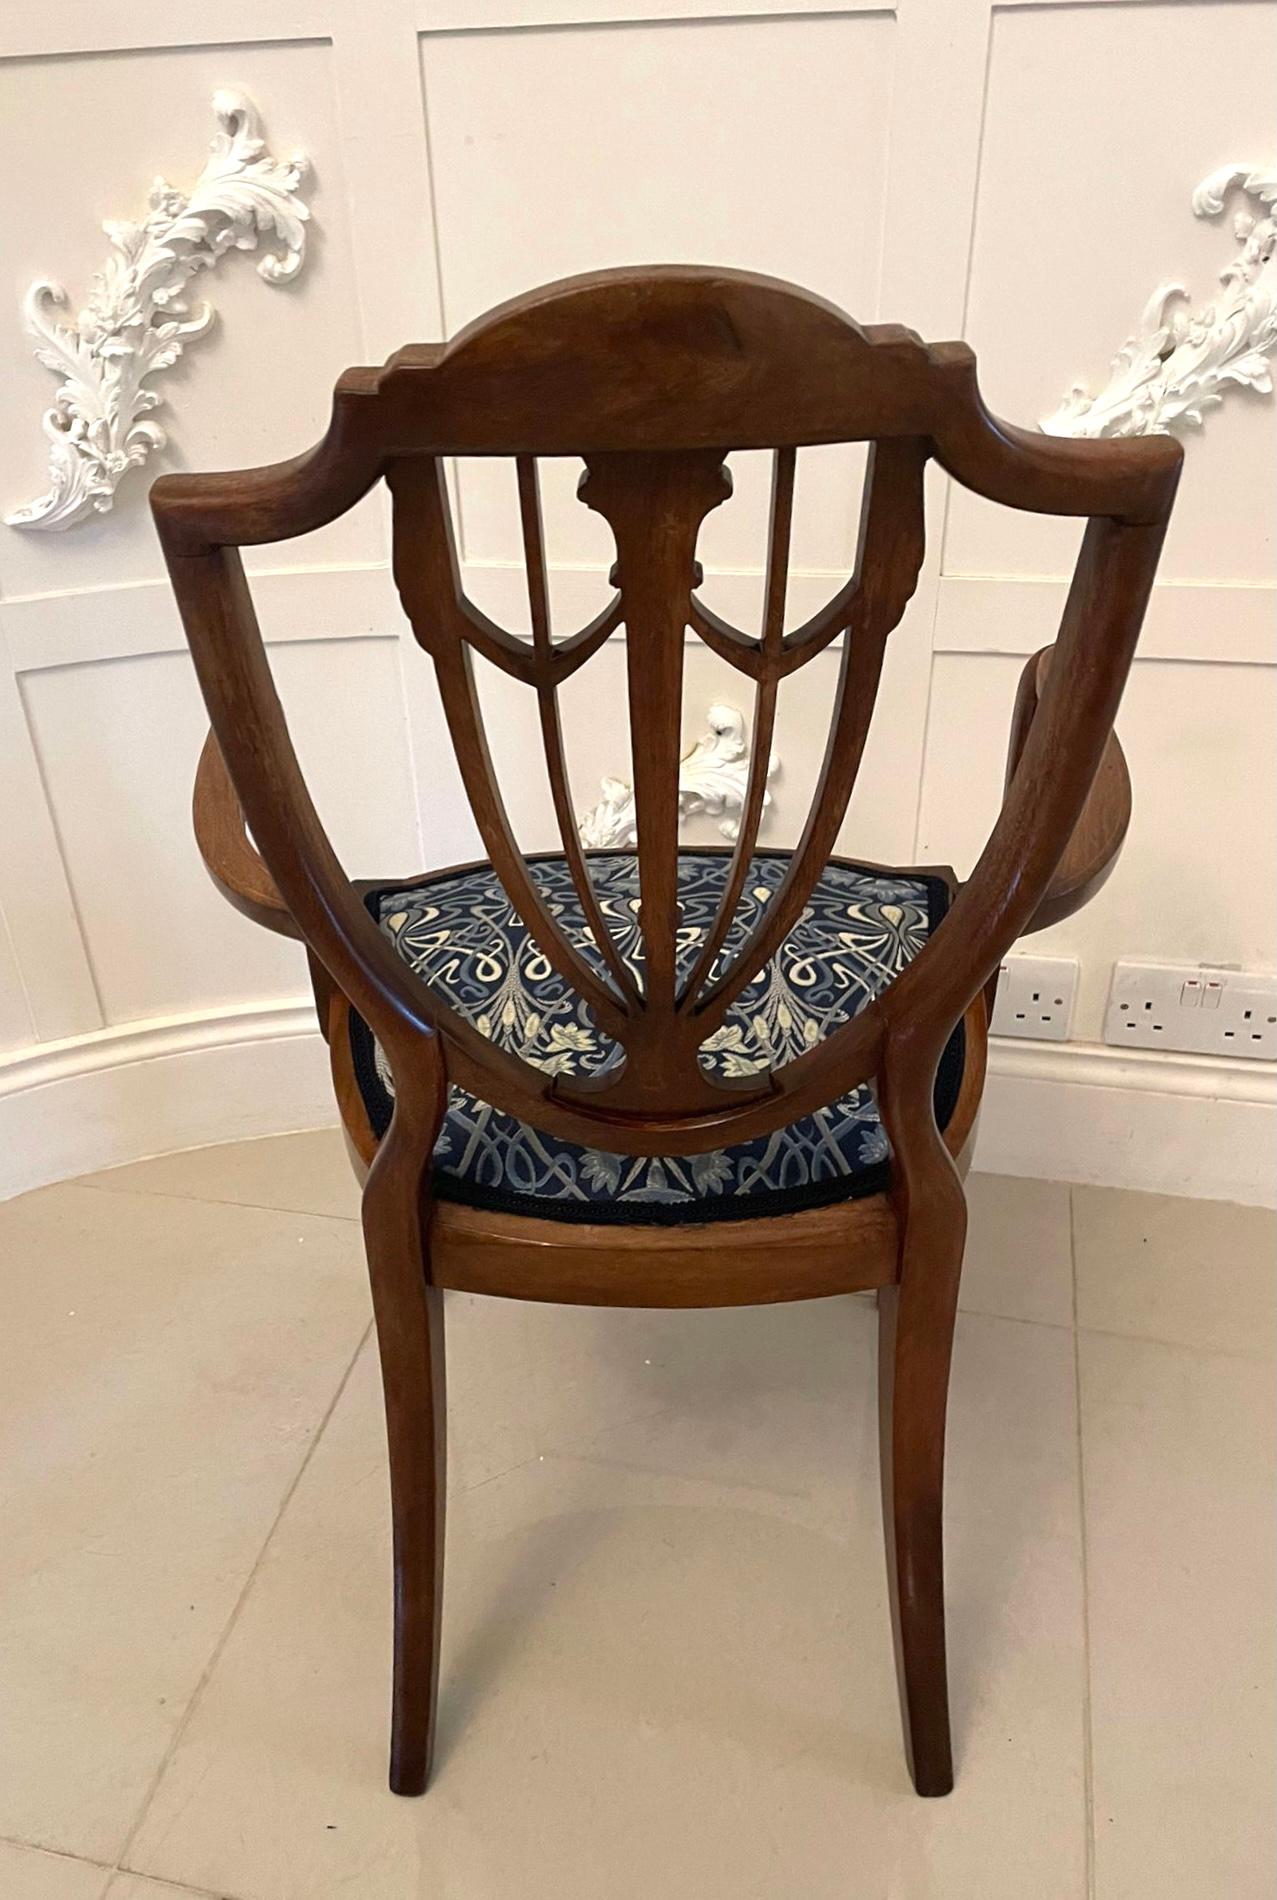 Fine Quality Antique Mahogany Inlaid Desk Chair In Good Condition For Sale In Suffolk, GB